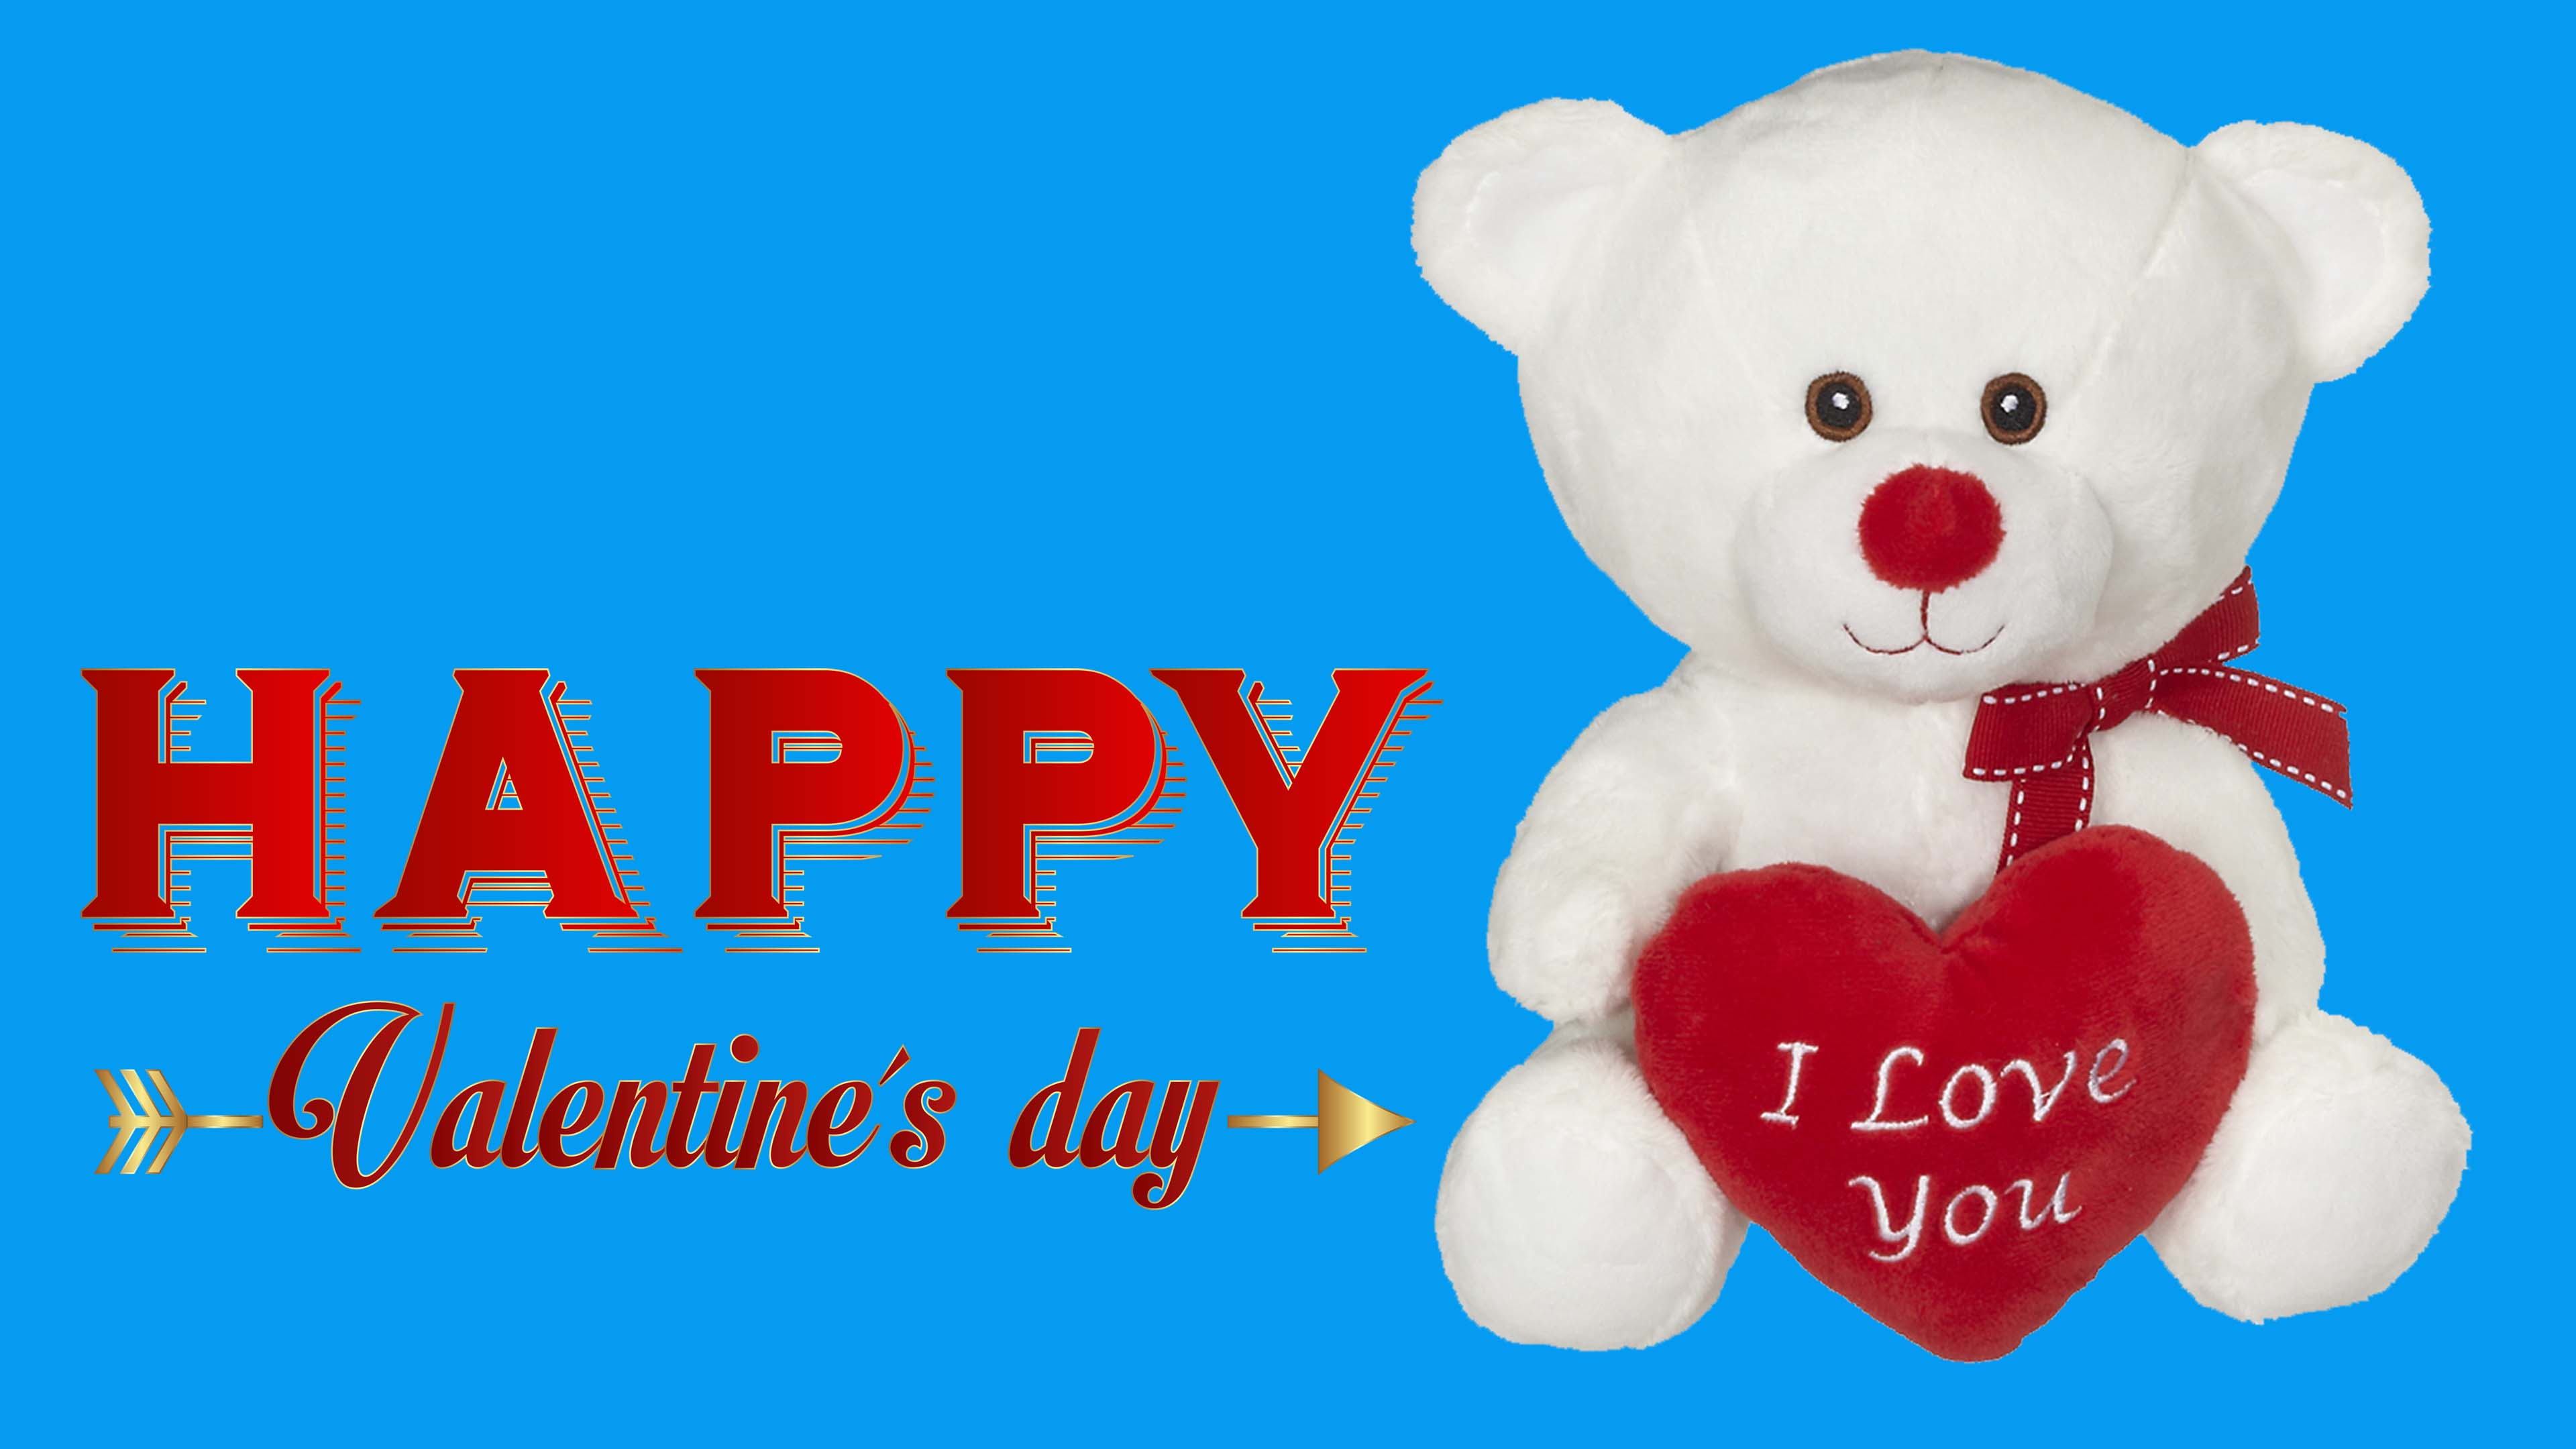 Happy Valentines Day I Love You White Teddy Bear Greeting Card